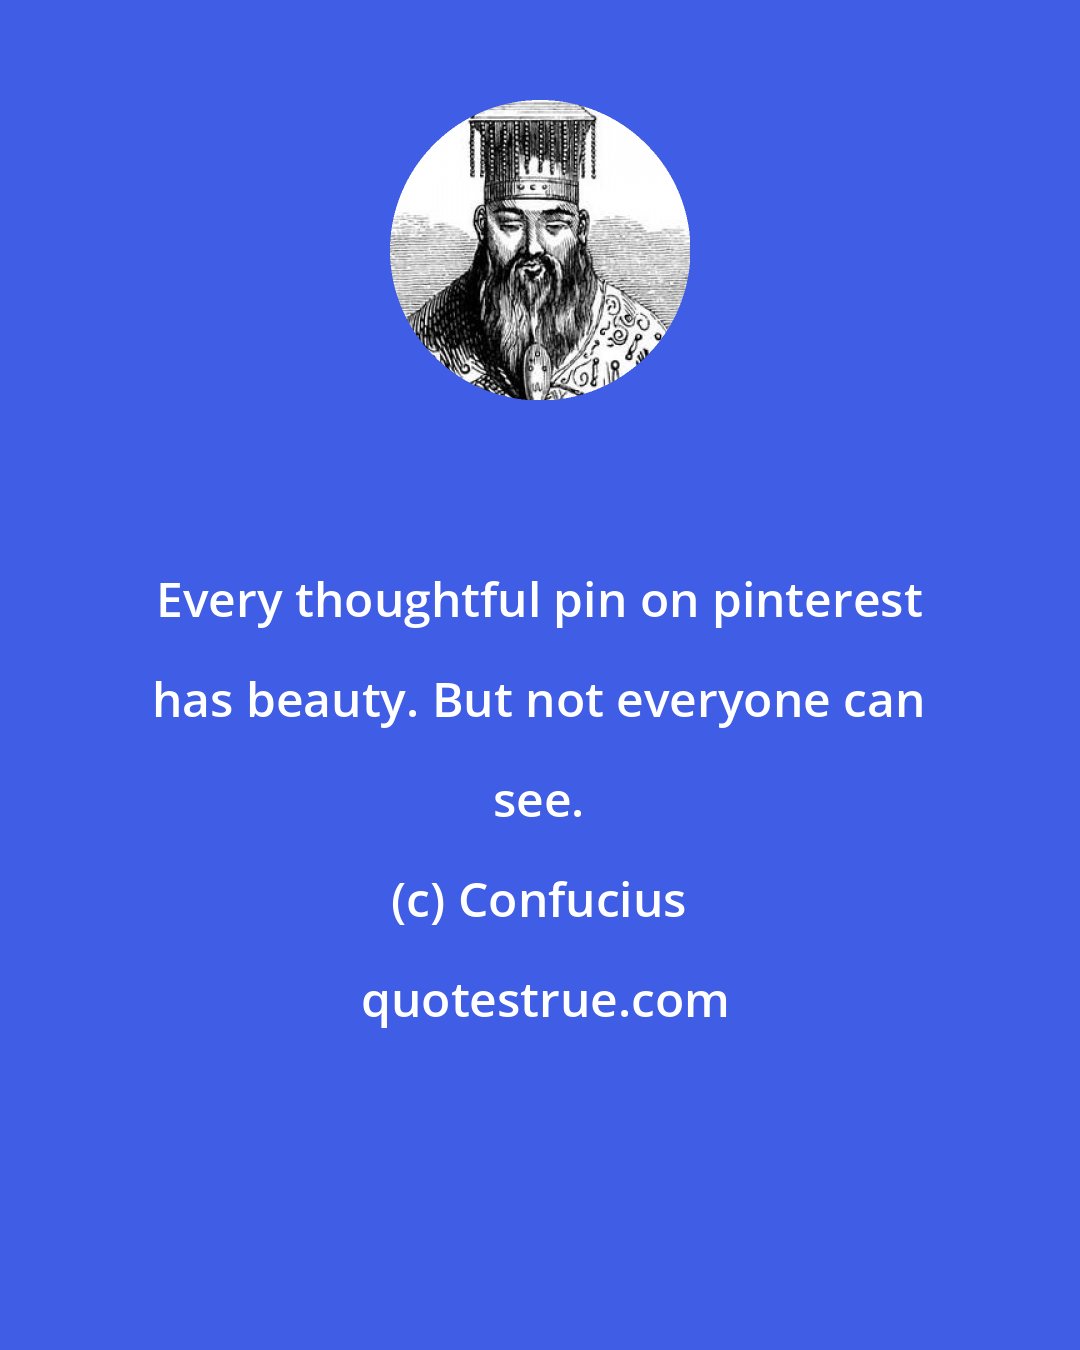 Confucius: Every thoughtful pin on pinterest has beauty. But not everyone can see.